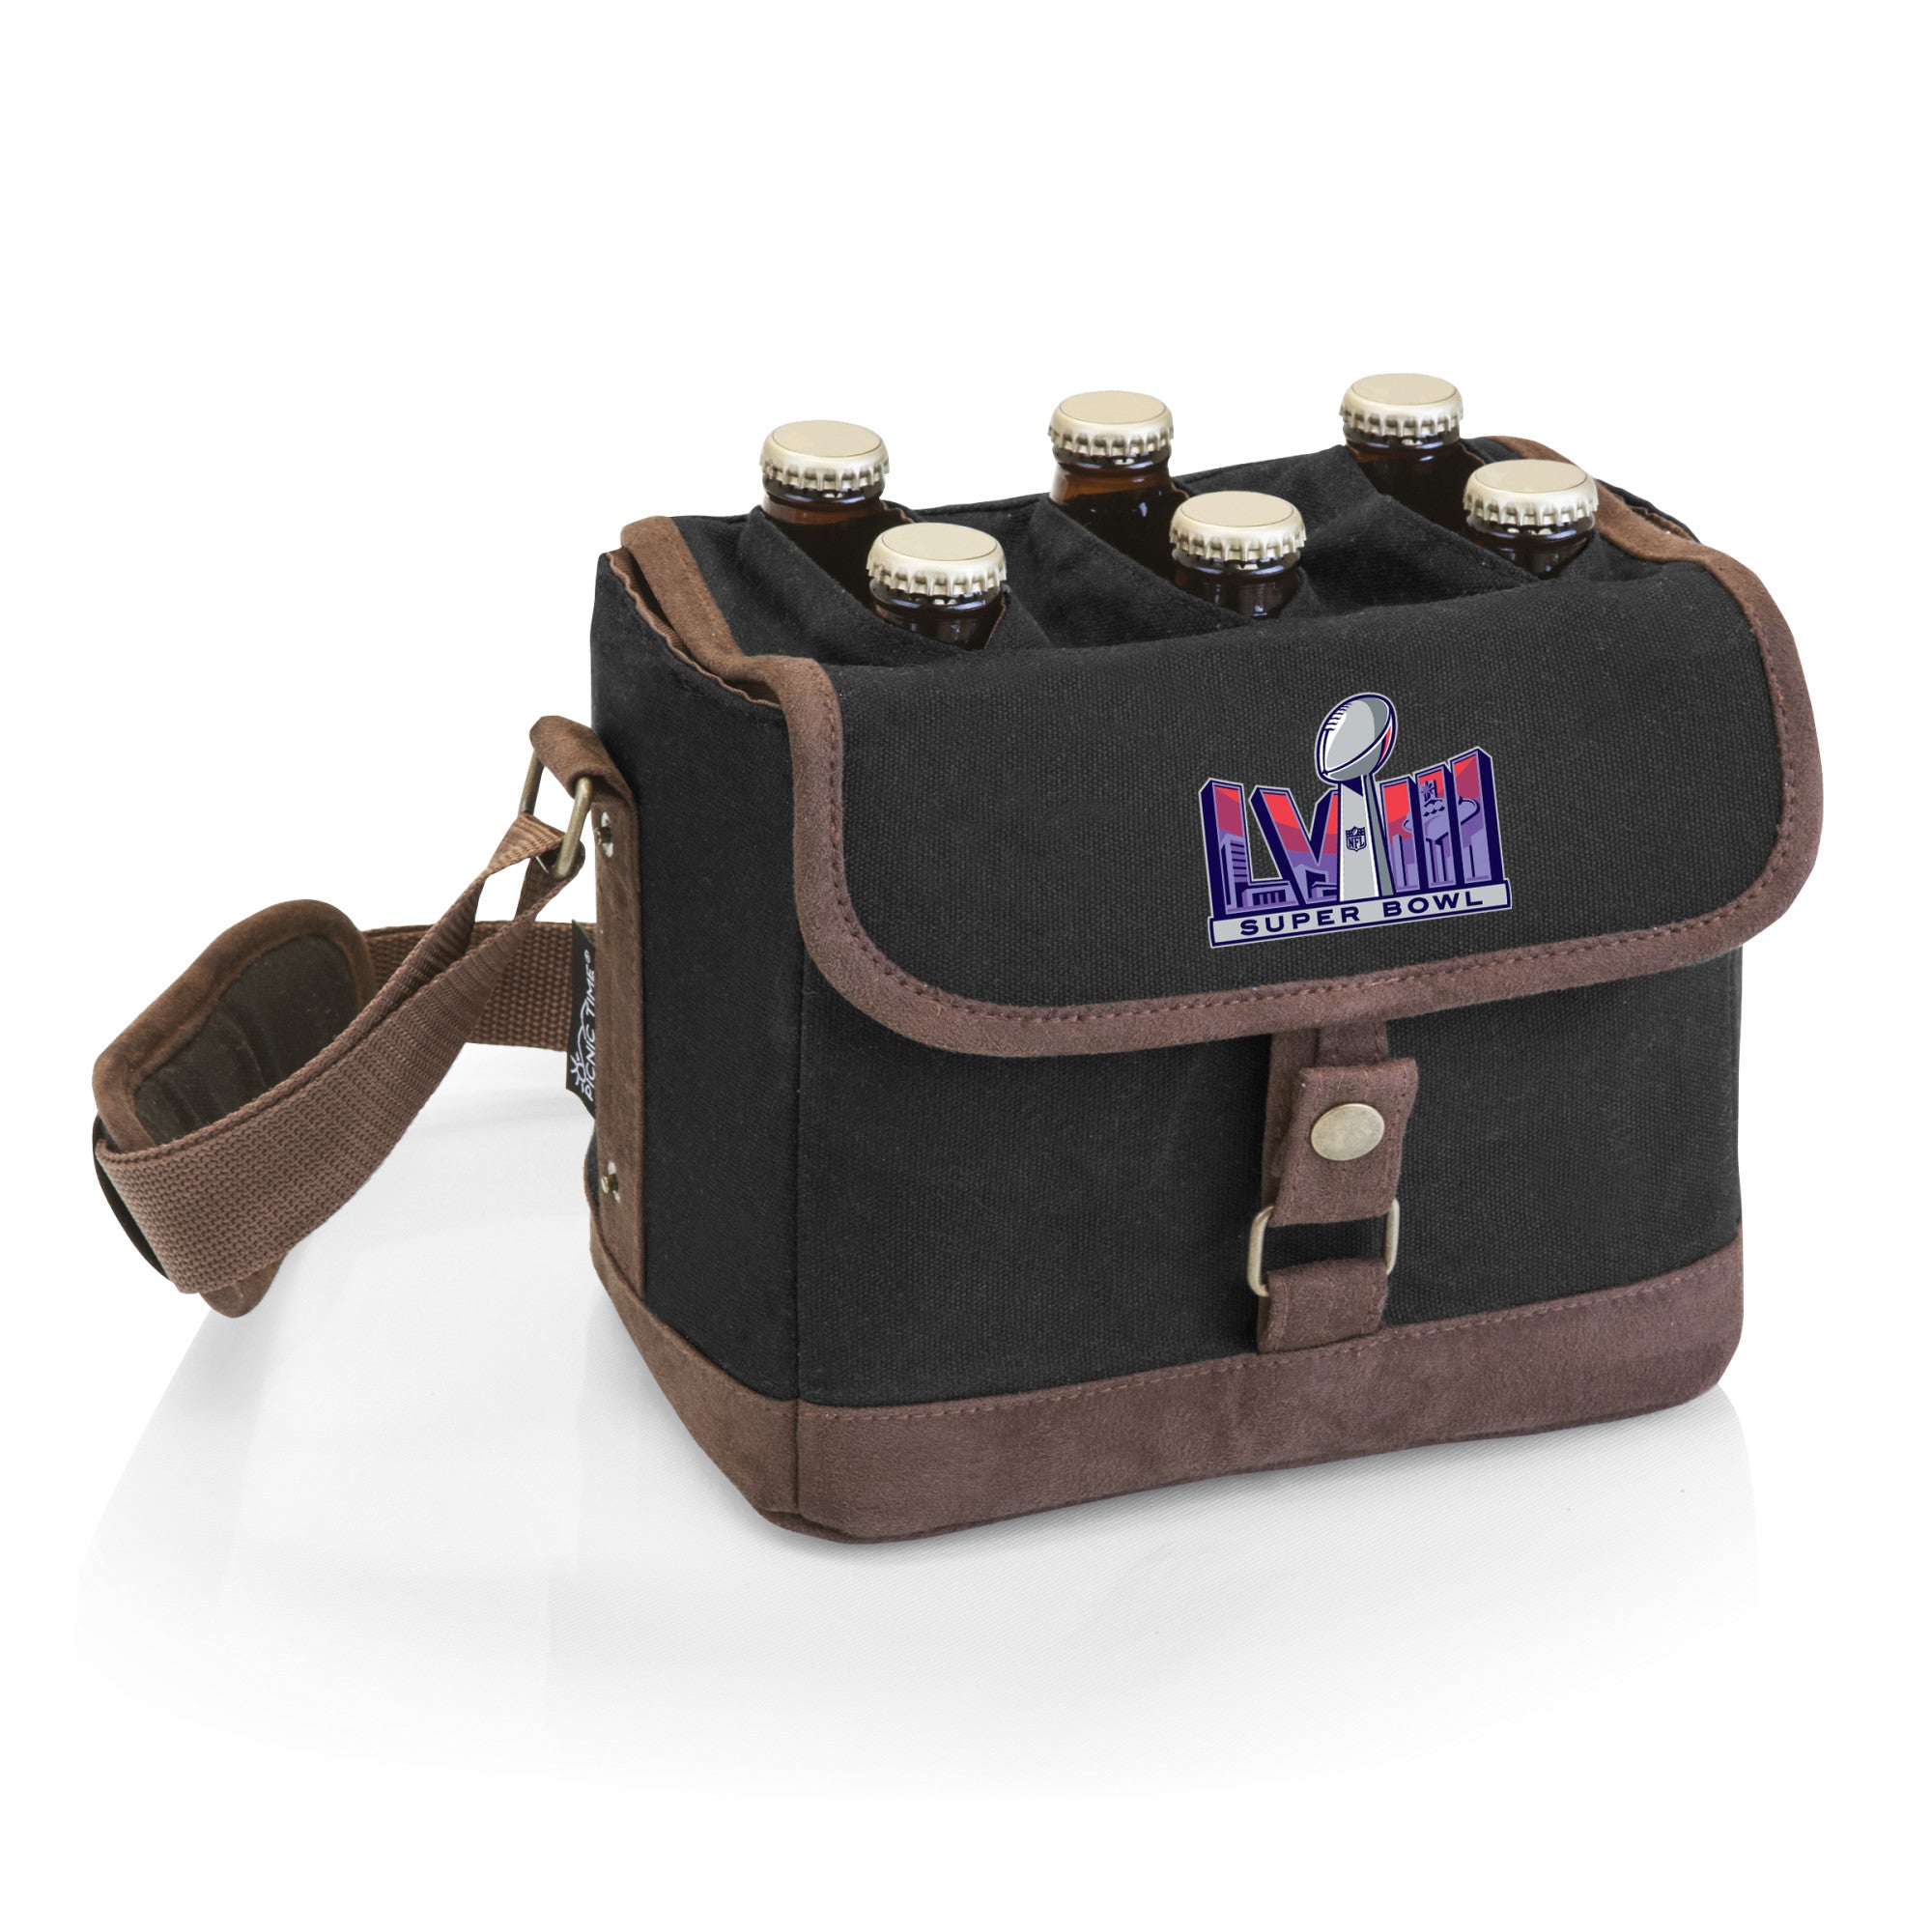 Super Bowl 58 - Beer Caddy Cooler Tote with Opener